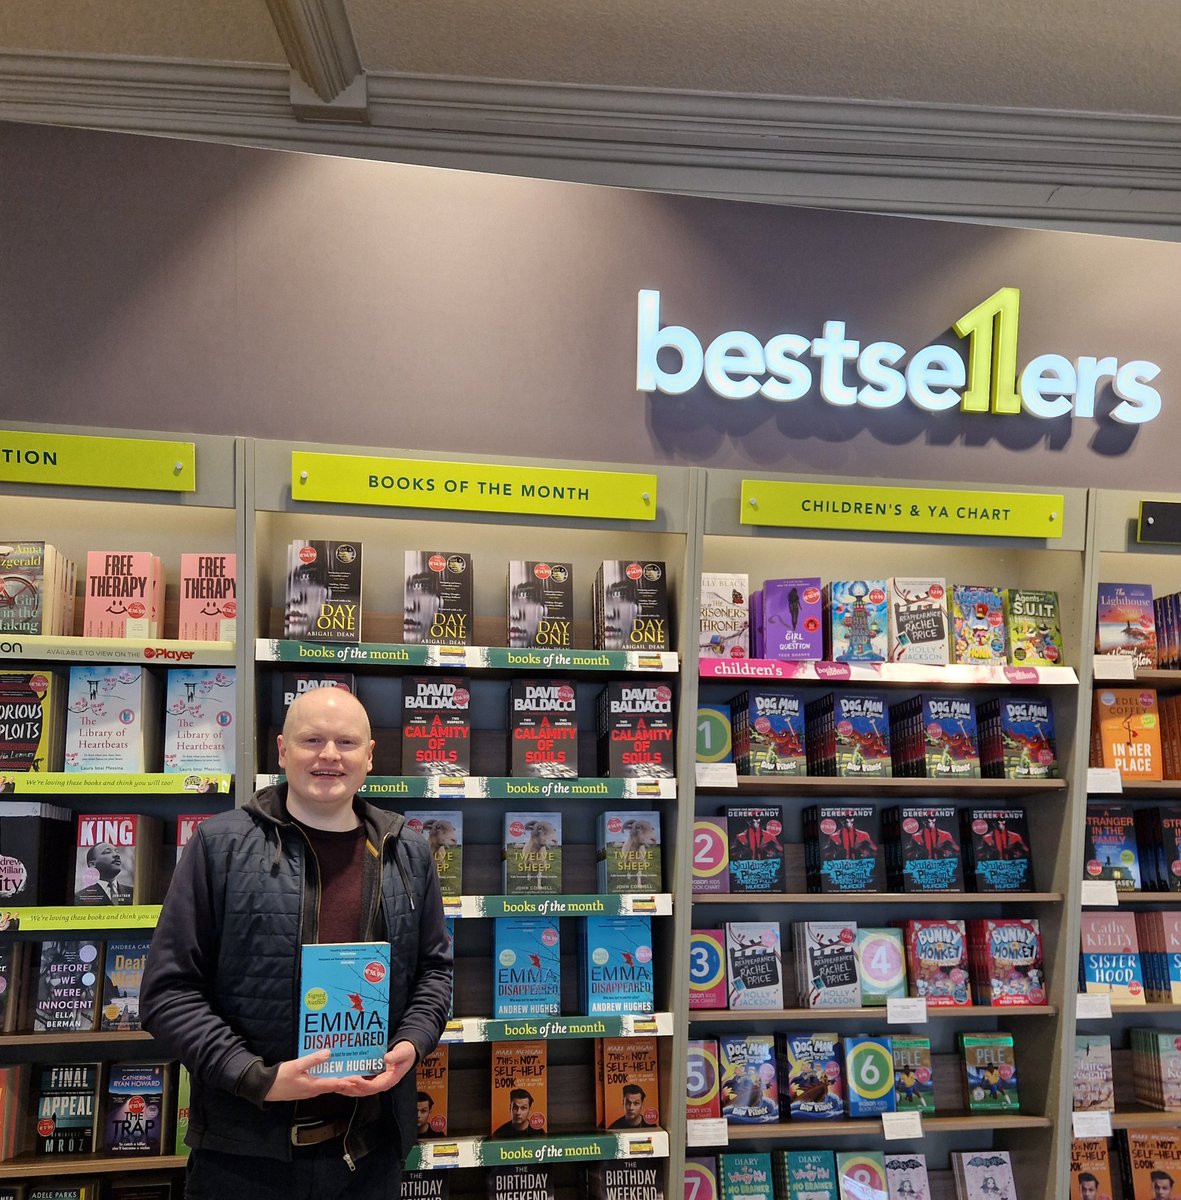 Andrew in @easons Nassau Street. Lots of signed copies of Emma, Disappeared available in-store now. Many thanks to Caron and Cosmina for their warm welcome. Eason Book of the Month. @And_Hughes